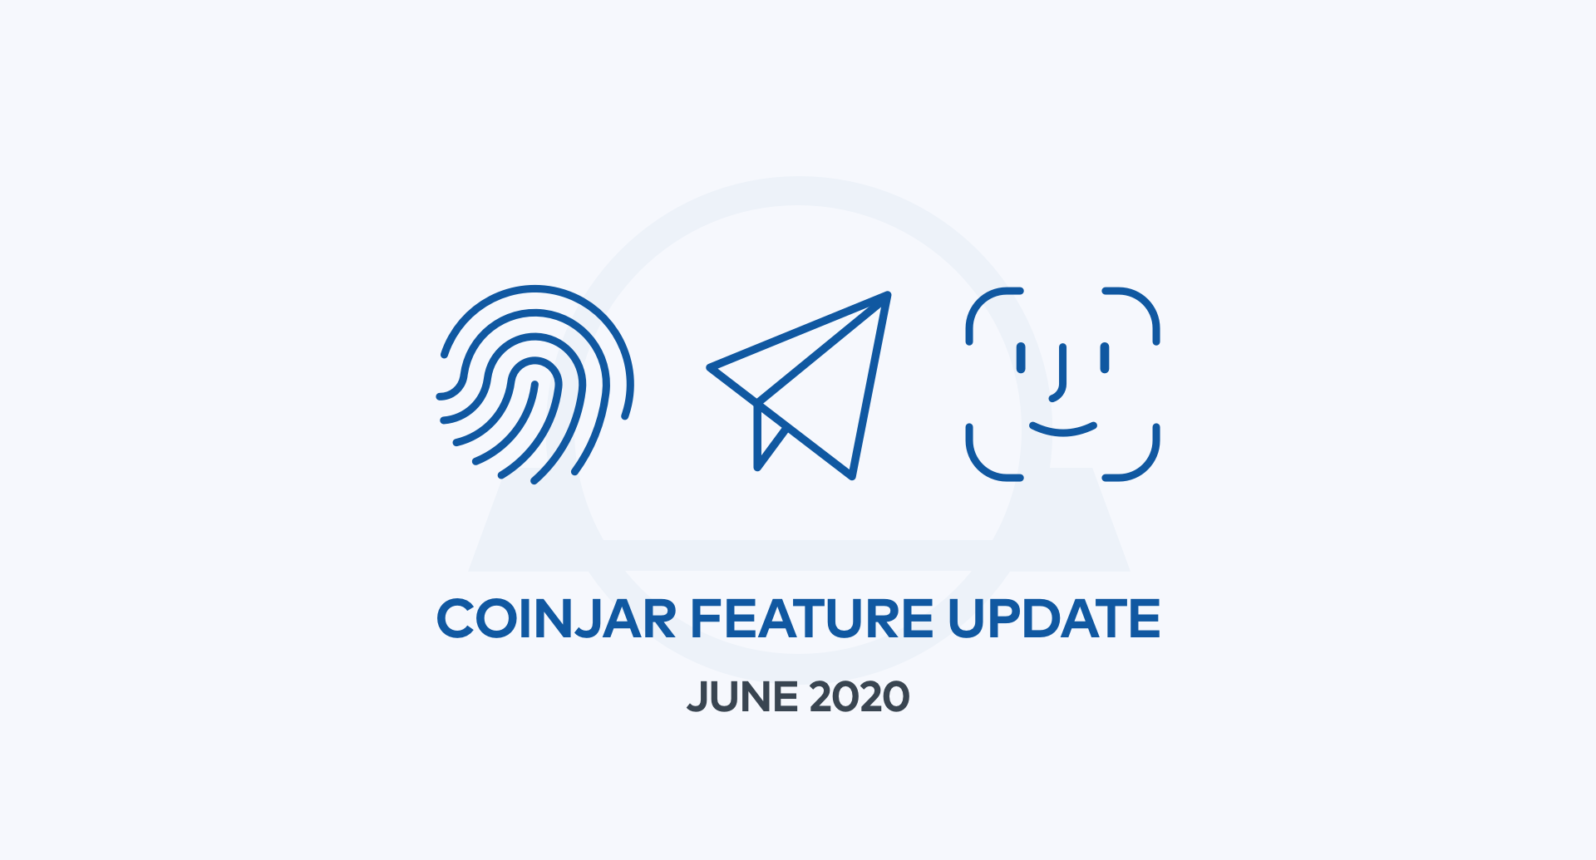 CoinJar fee reduction and feature update